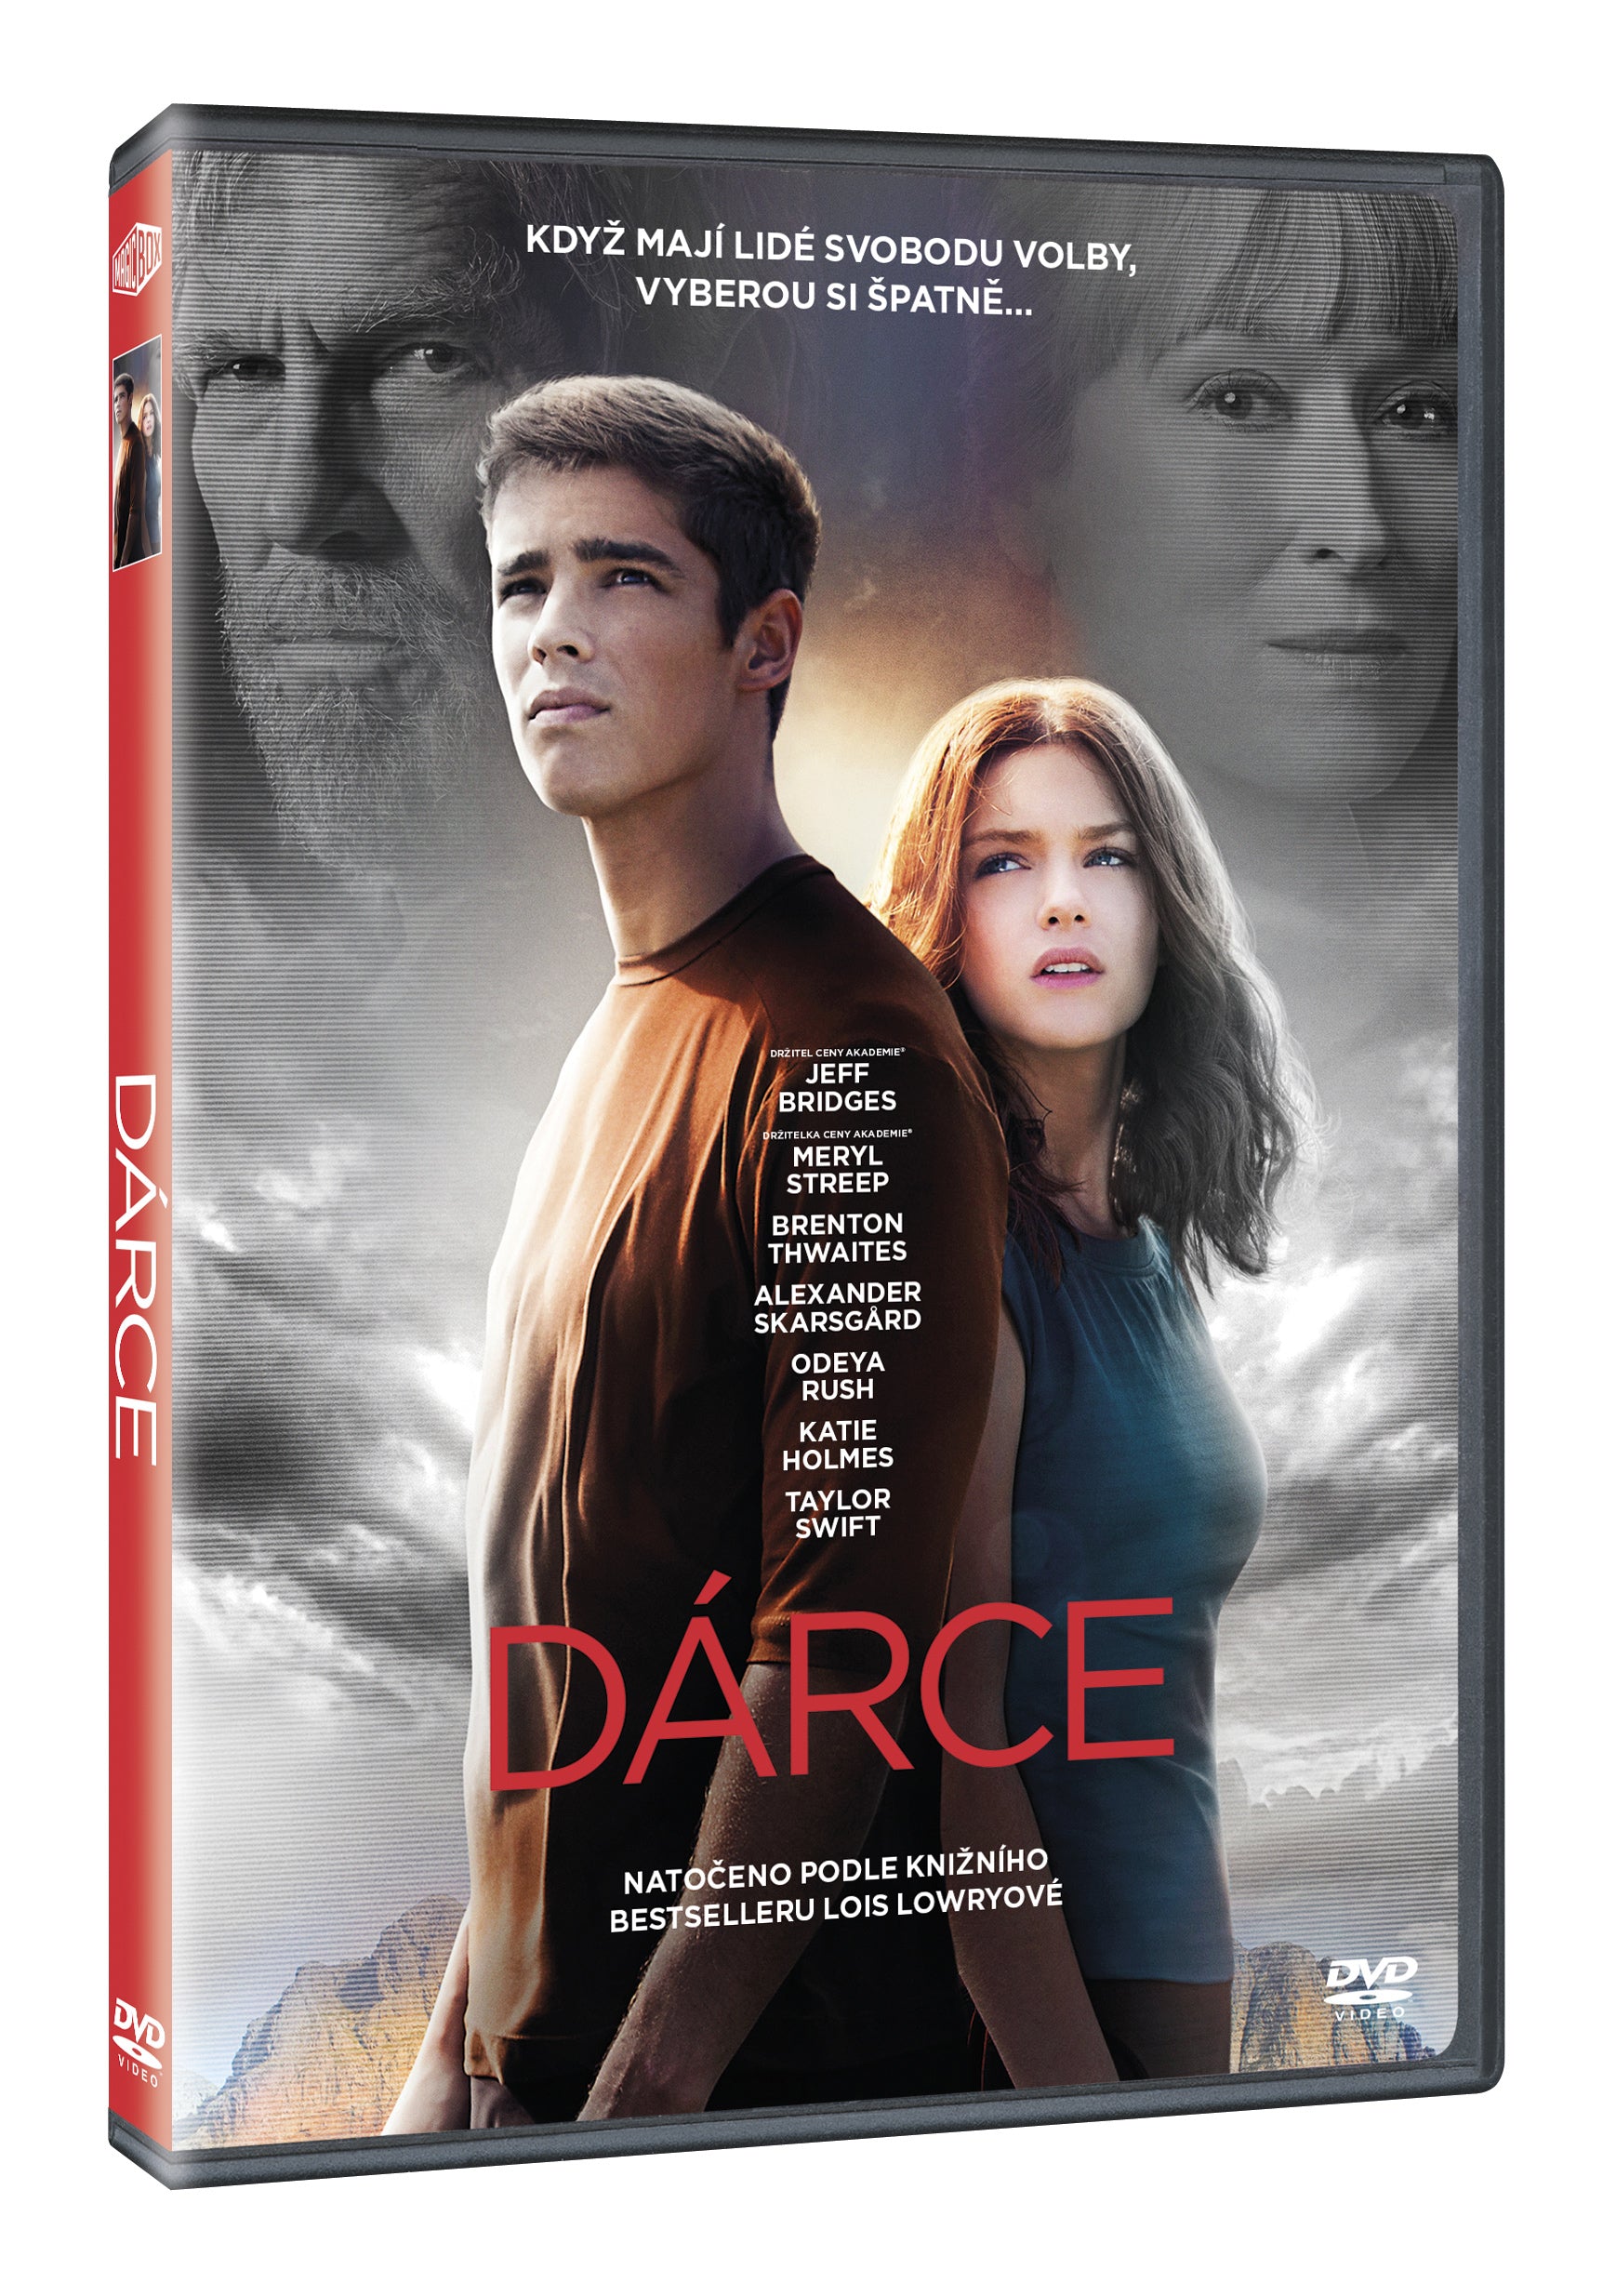 Darce DVD / The Giver